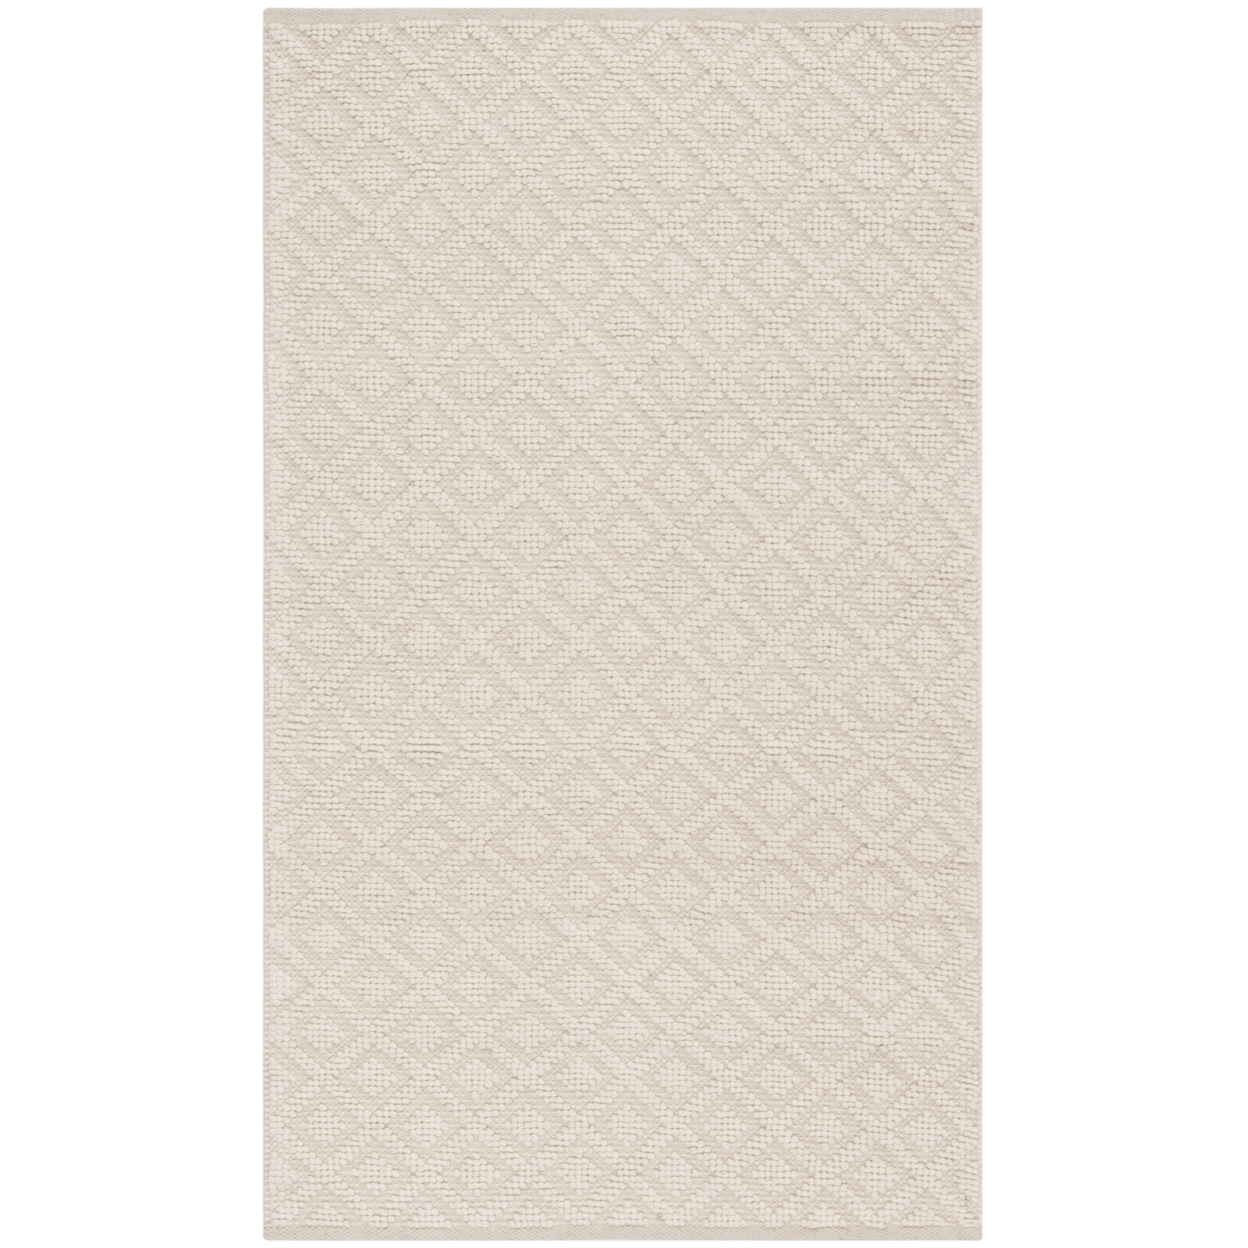 SAFAVIEH Vermont Collection VRM104A Handwoven Ivory Rug - 3 X 5